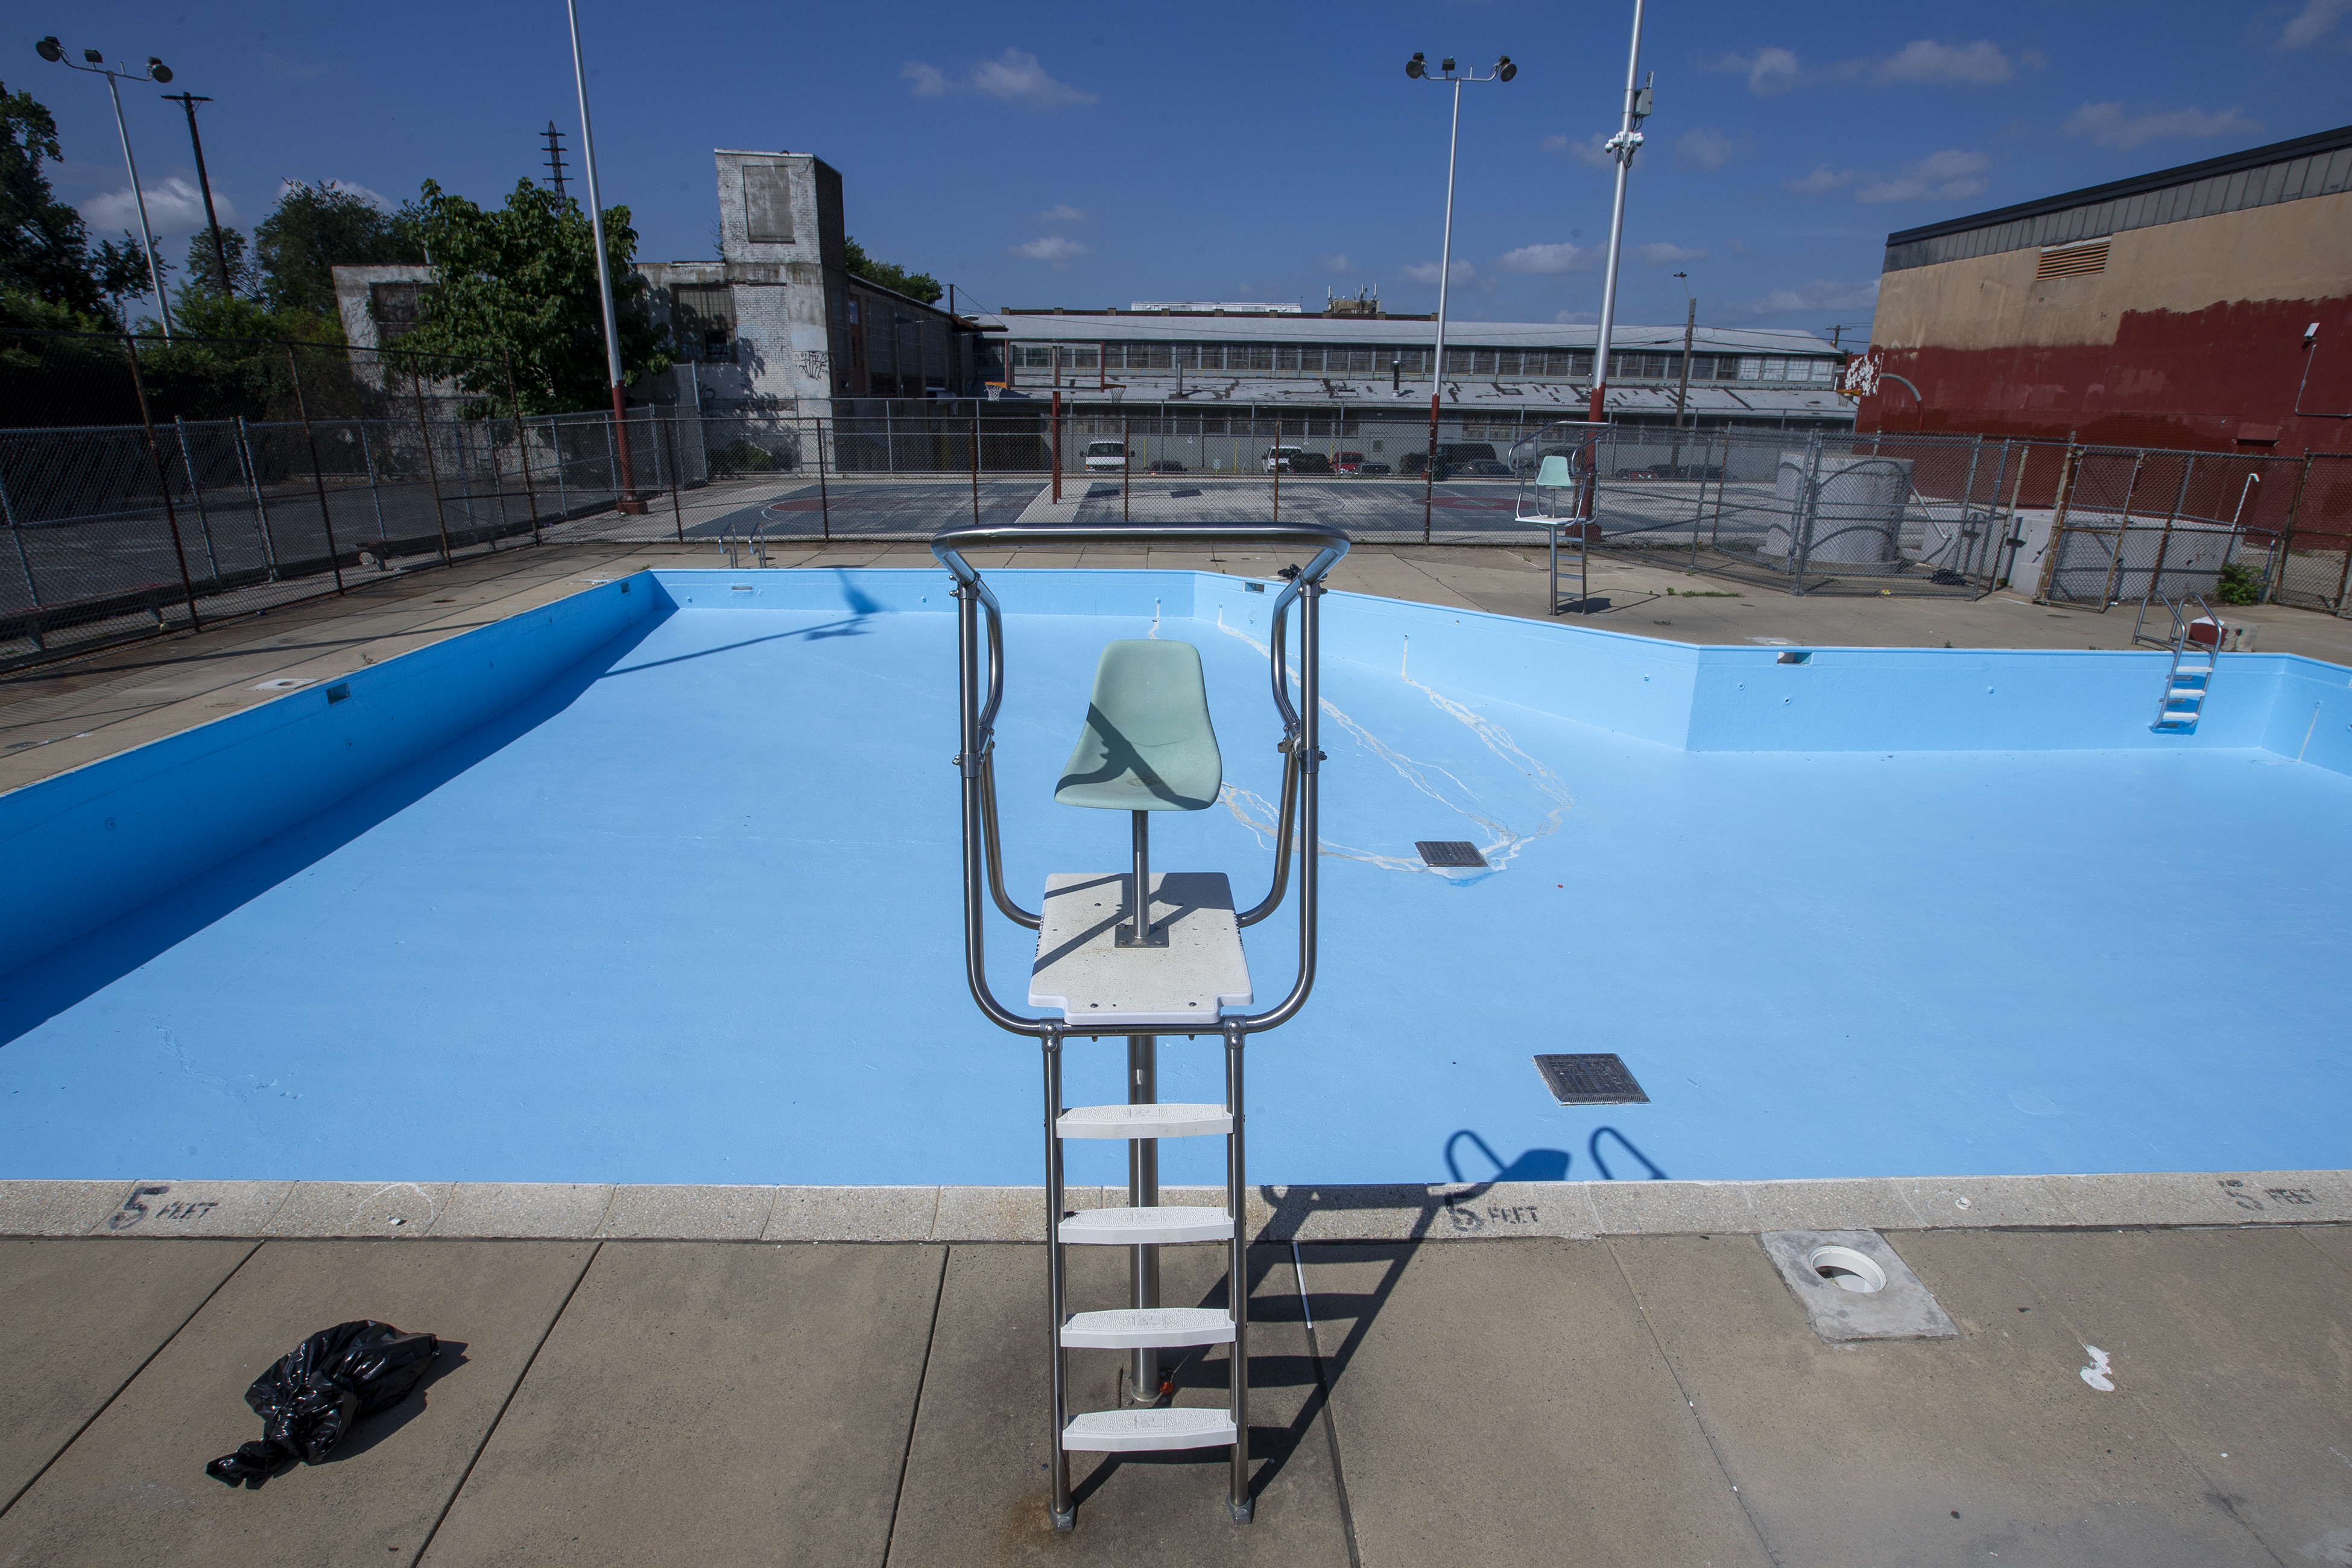 The Philadelphia pools will open in 2021 and the pools that will